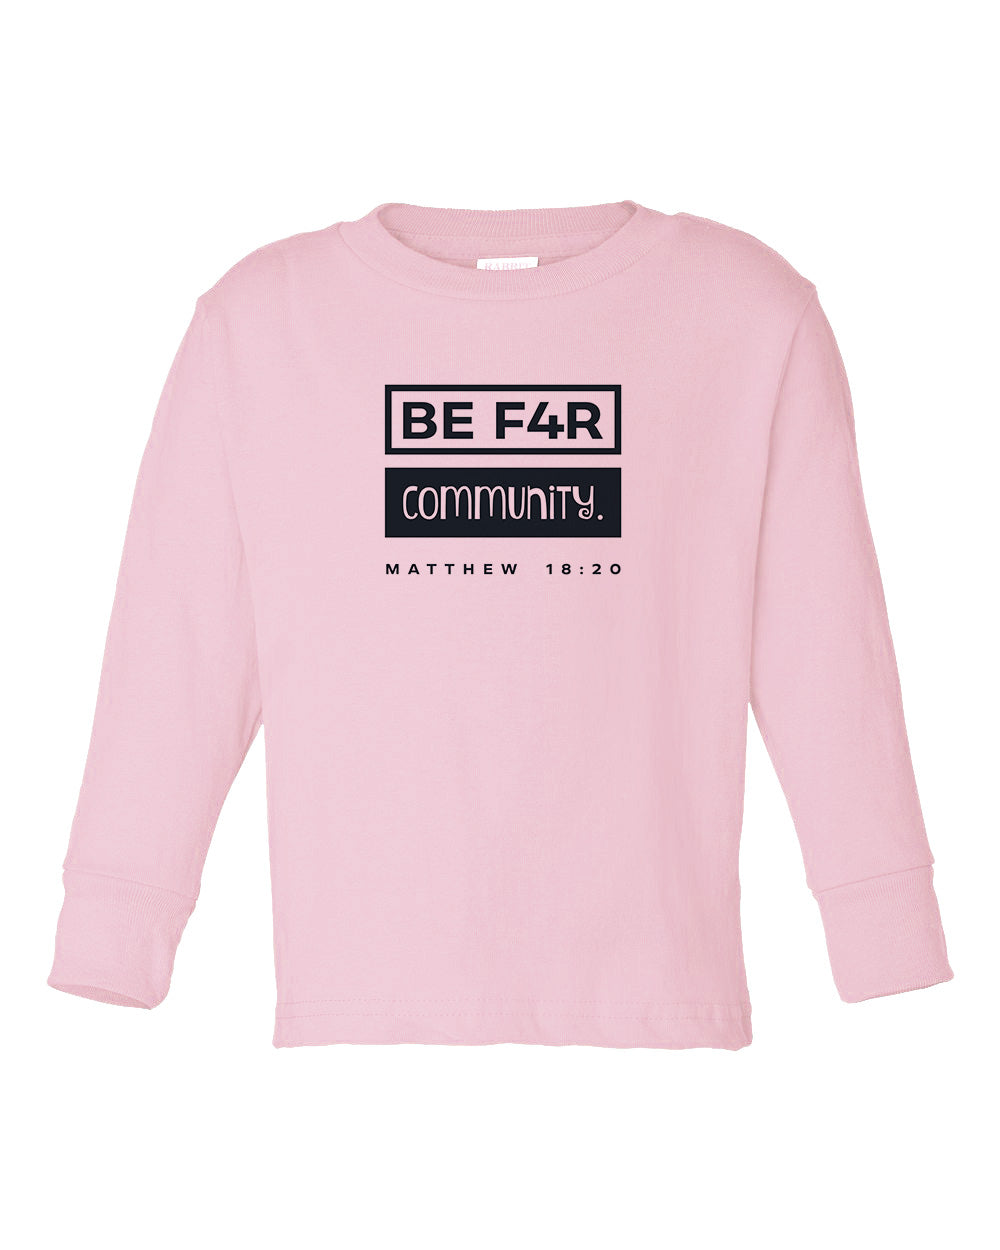 BE F4R Community 3 Toddler Long Sleeve